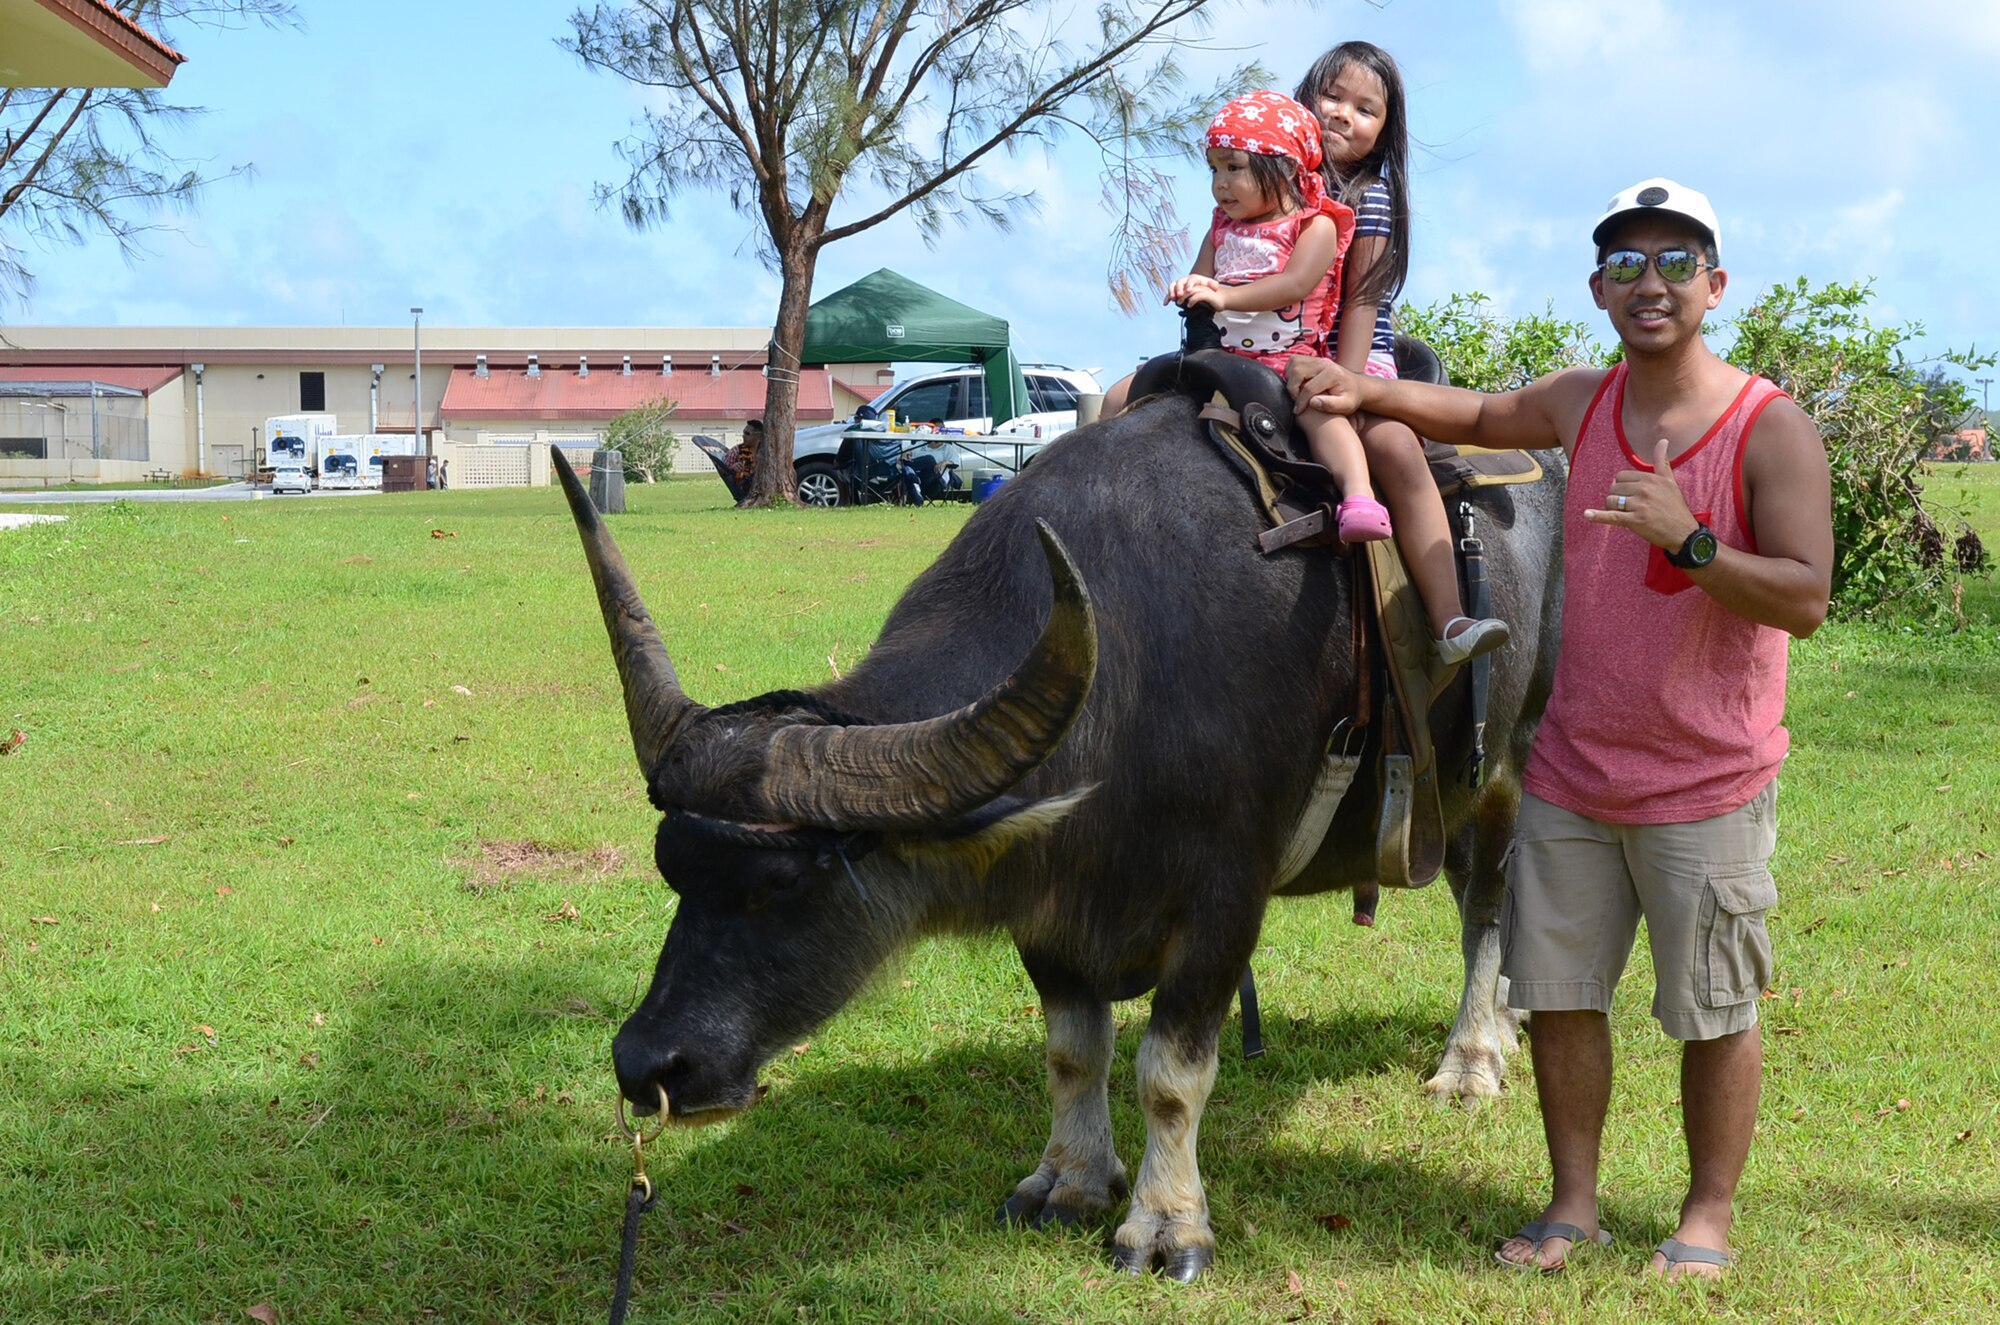 Attendees of the Memorial Day Bash ride a carabao May 25, 2015, at Andersen Air Force Base, Guam. The event included family friendly activities, such as zip lining, multiple bounce houses, food, a barbeque cook-off and a kids’ race track to entertain Team Andersen during the holiday commemoration.  (U.S. Air Force photo by Airman 1st Class Alexa Ann Henderson/Released)